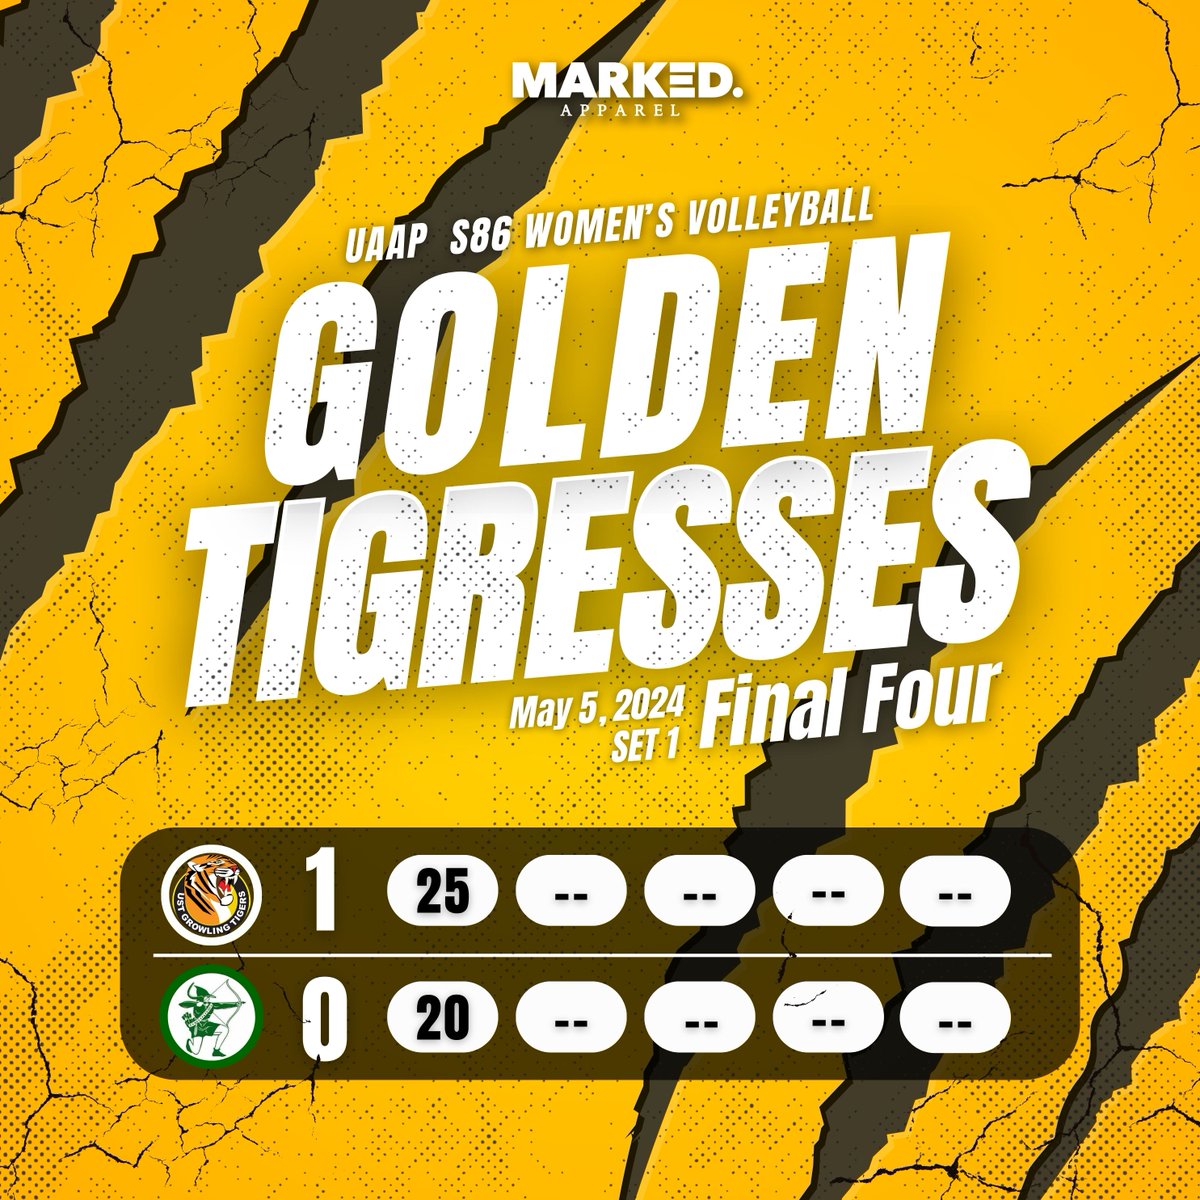 SET 1 IS OURS!

UST Golden Tigresses roar to victory, claiming Set 1 against DLSU Lady Spikers! What a fierce start to this epic clash! 

#GoUSTe #UAAPSeason86 #UAAPVolleyball #GetMarkedNow #USTvsDLSU